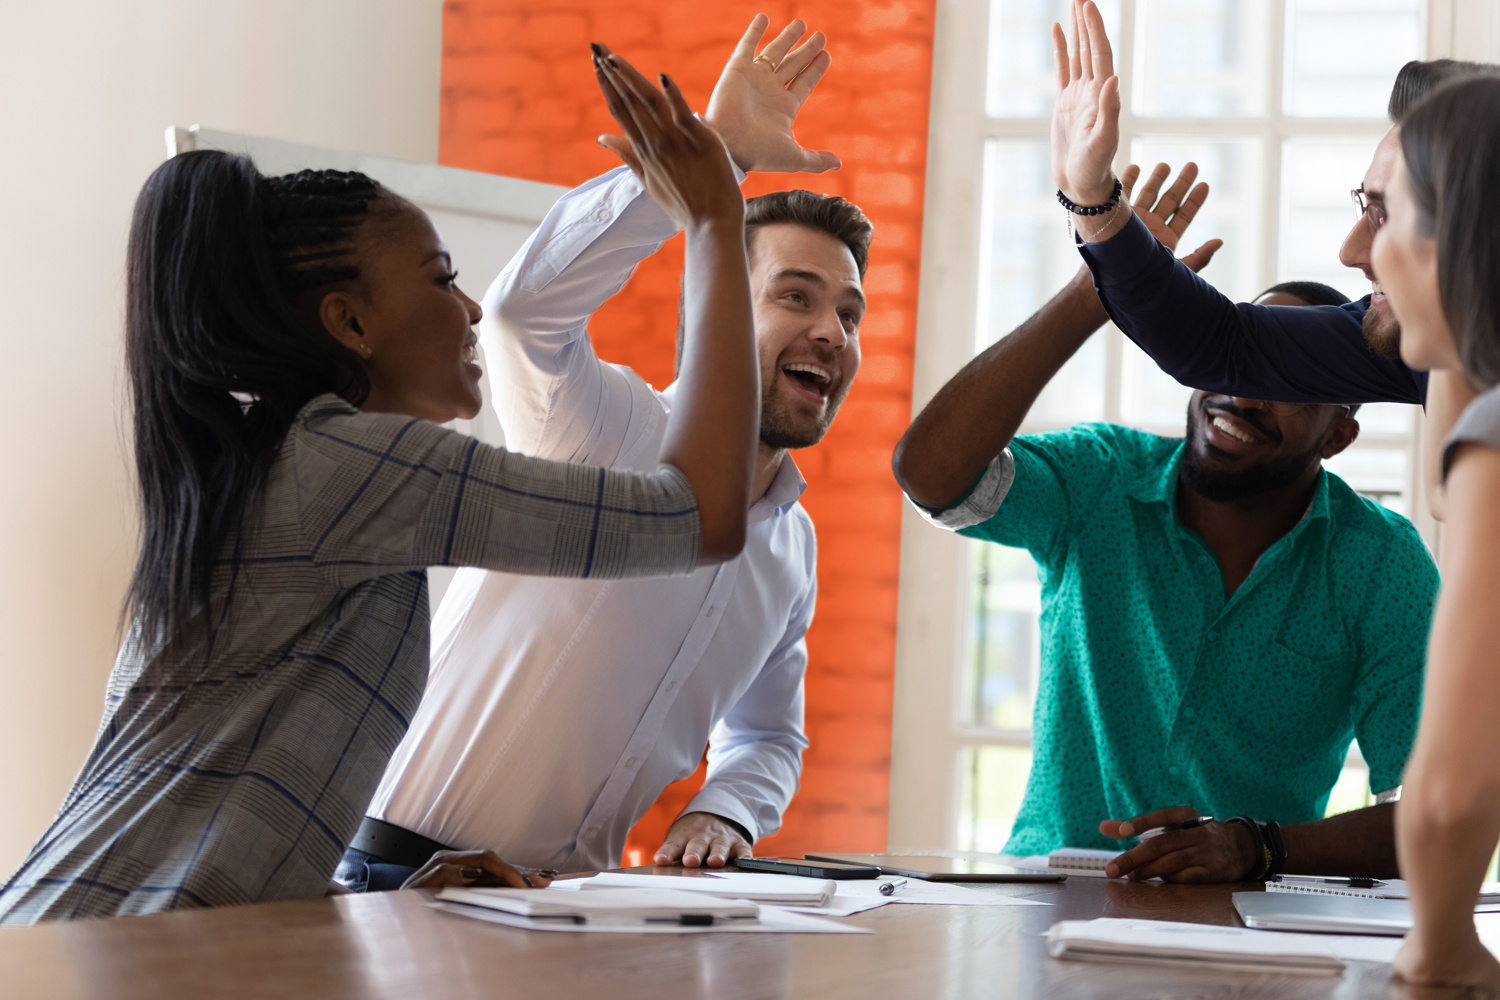 Multiracial euphoric business team people give high five at office table, happy excited diverse work group engaged in teambuilding celebrate corporate success win partnership power teamwork concept